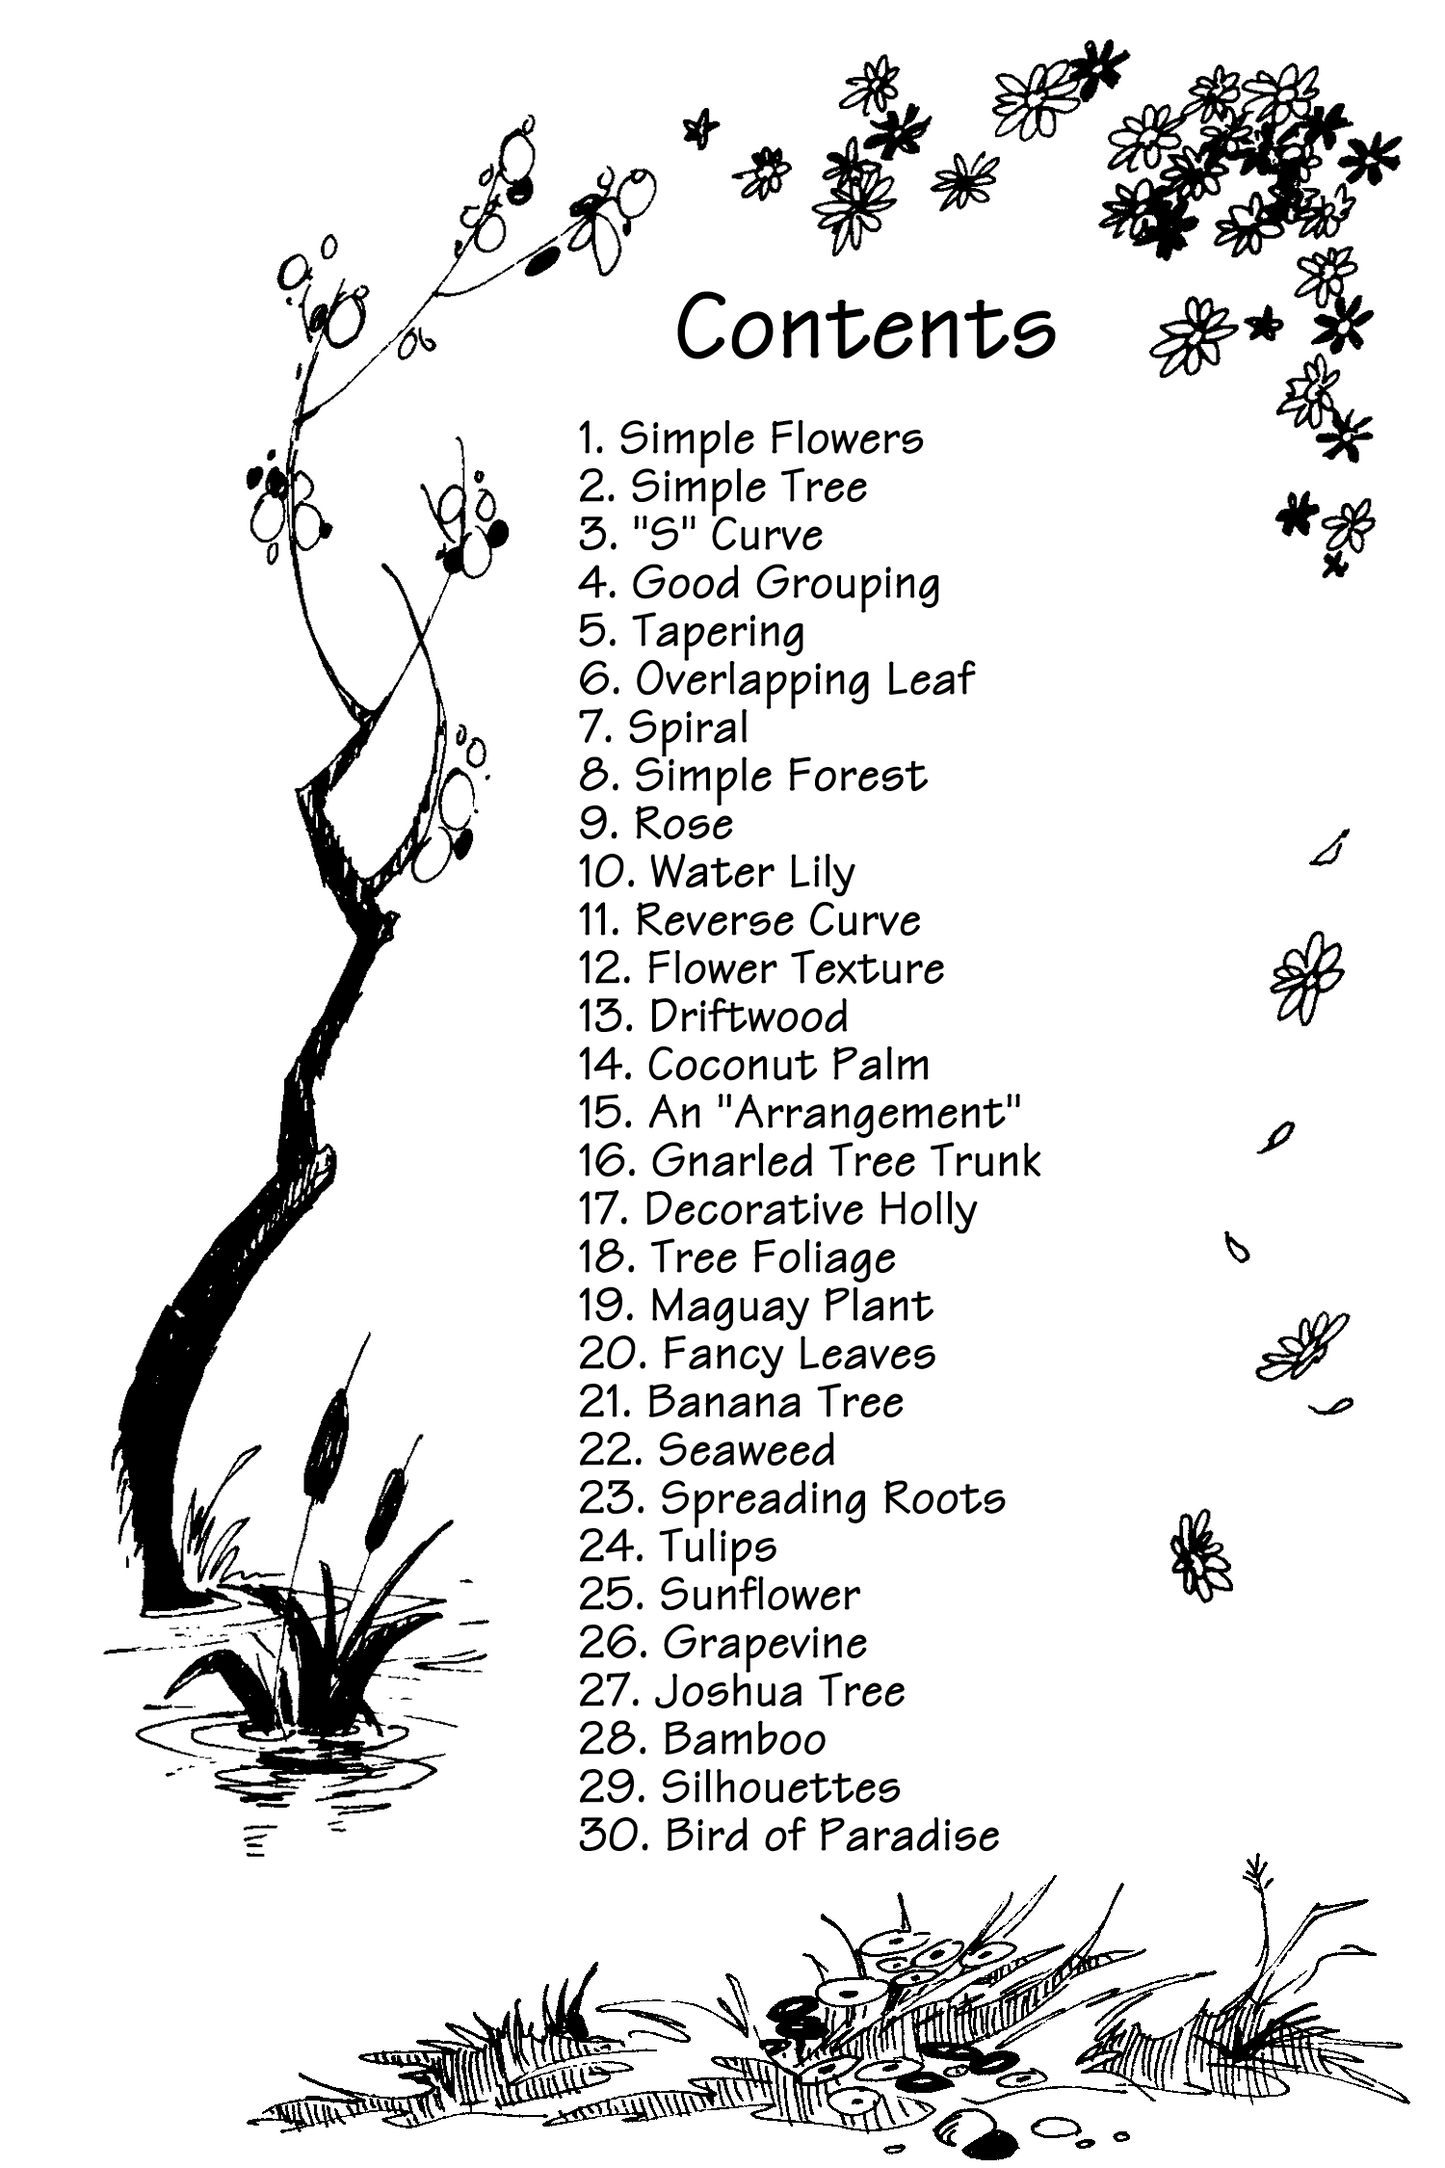 Table of contents from the book Flowers & Trees by Bruce McIntyre